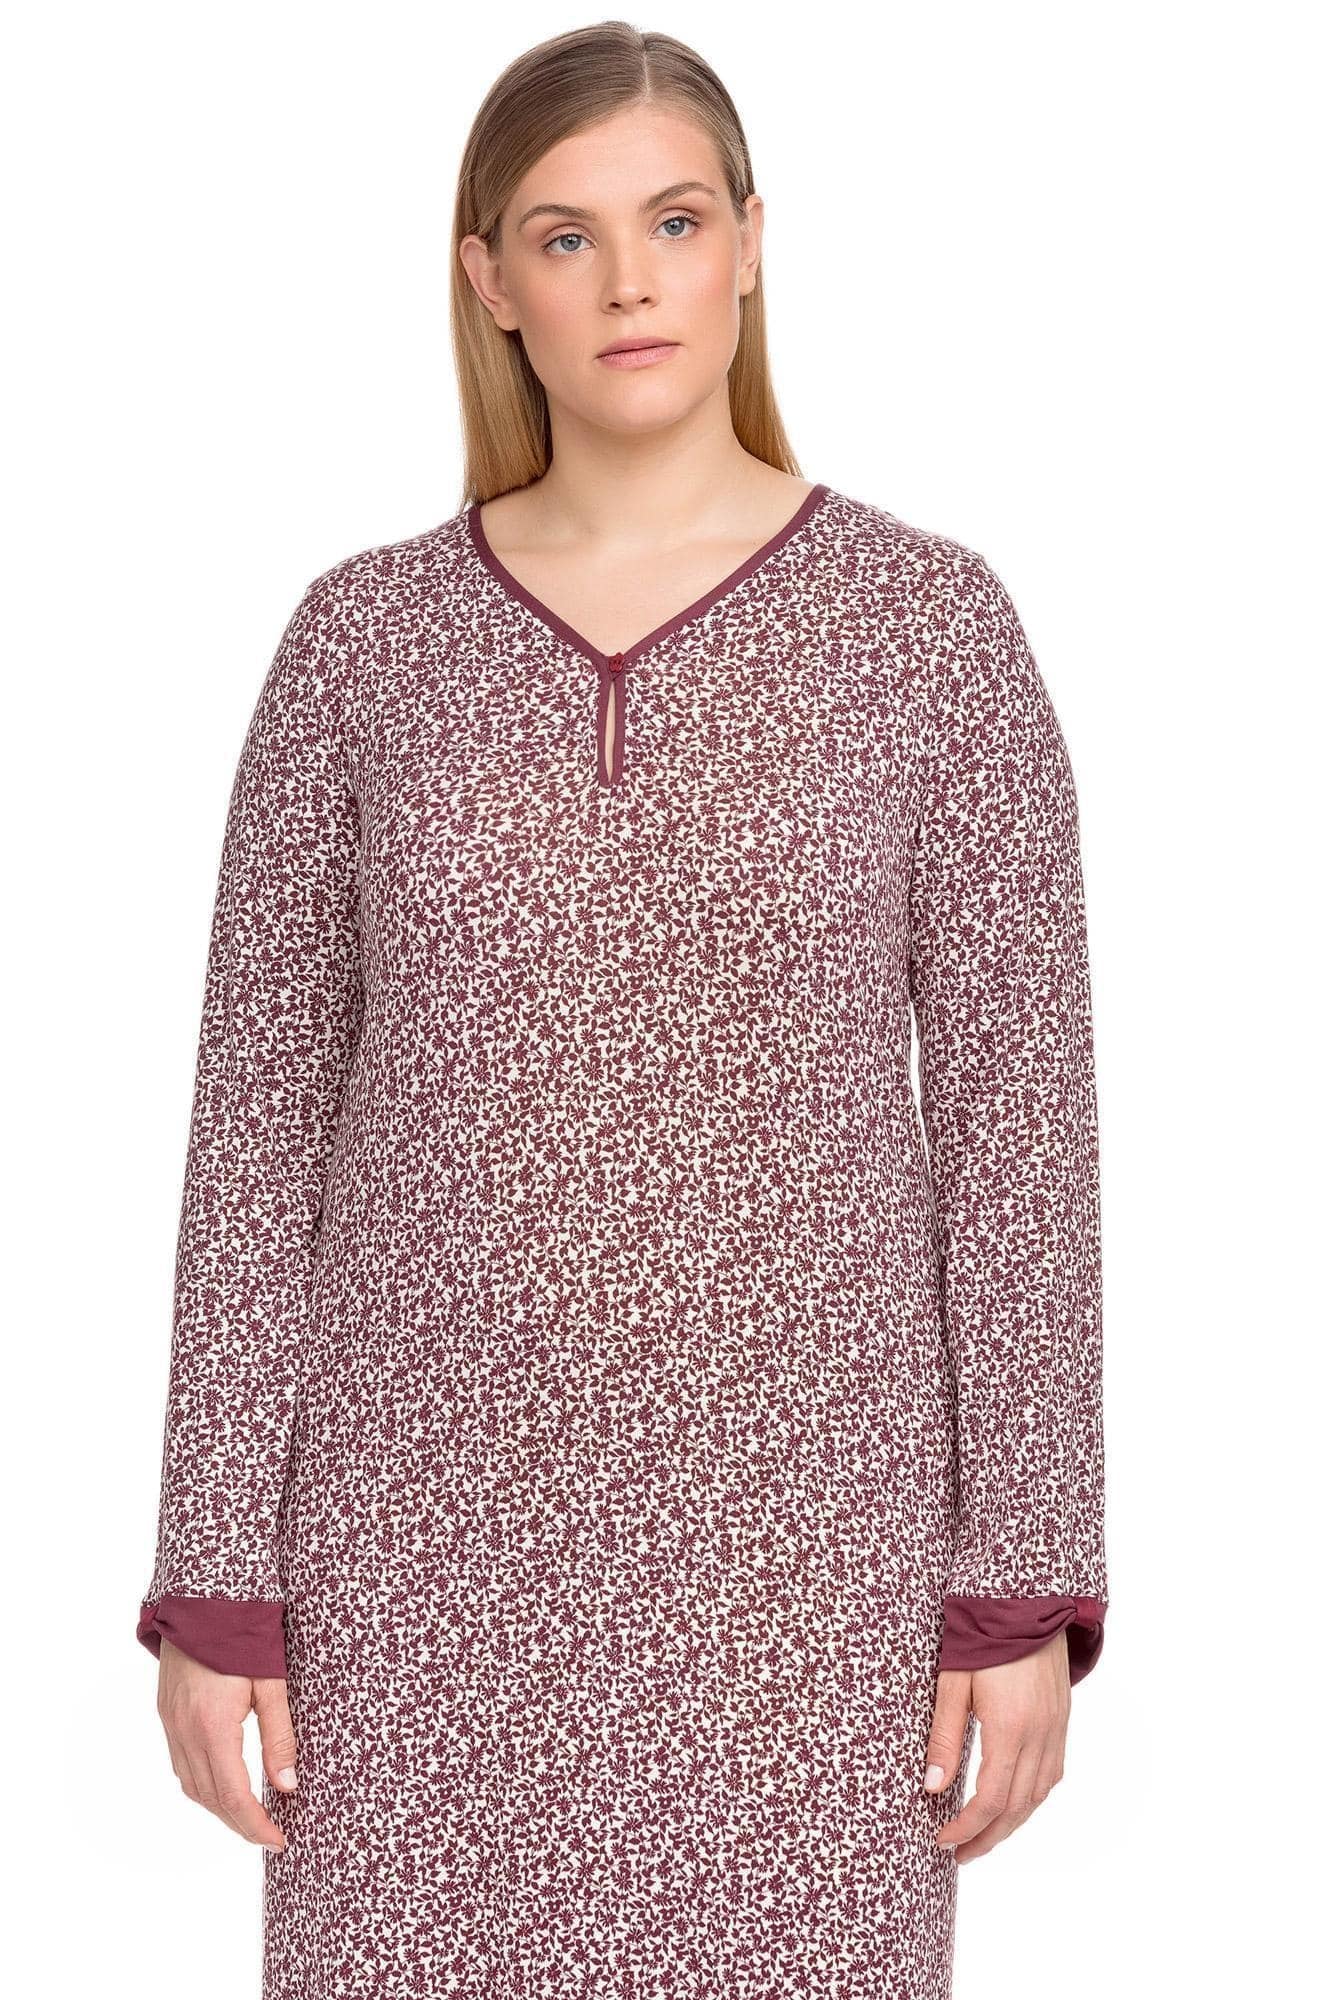 Women’s nightgown with V-neck